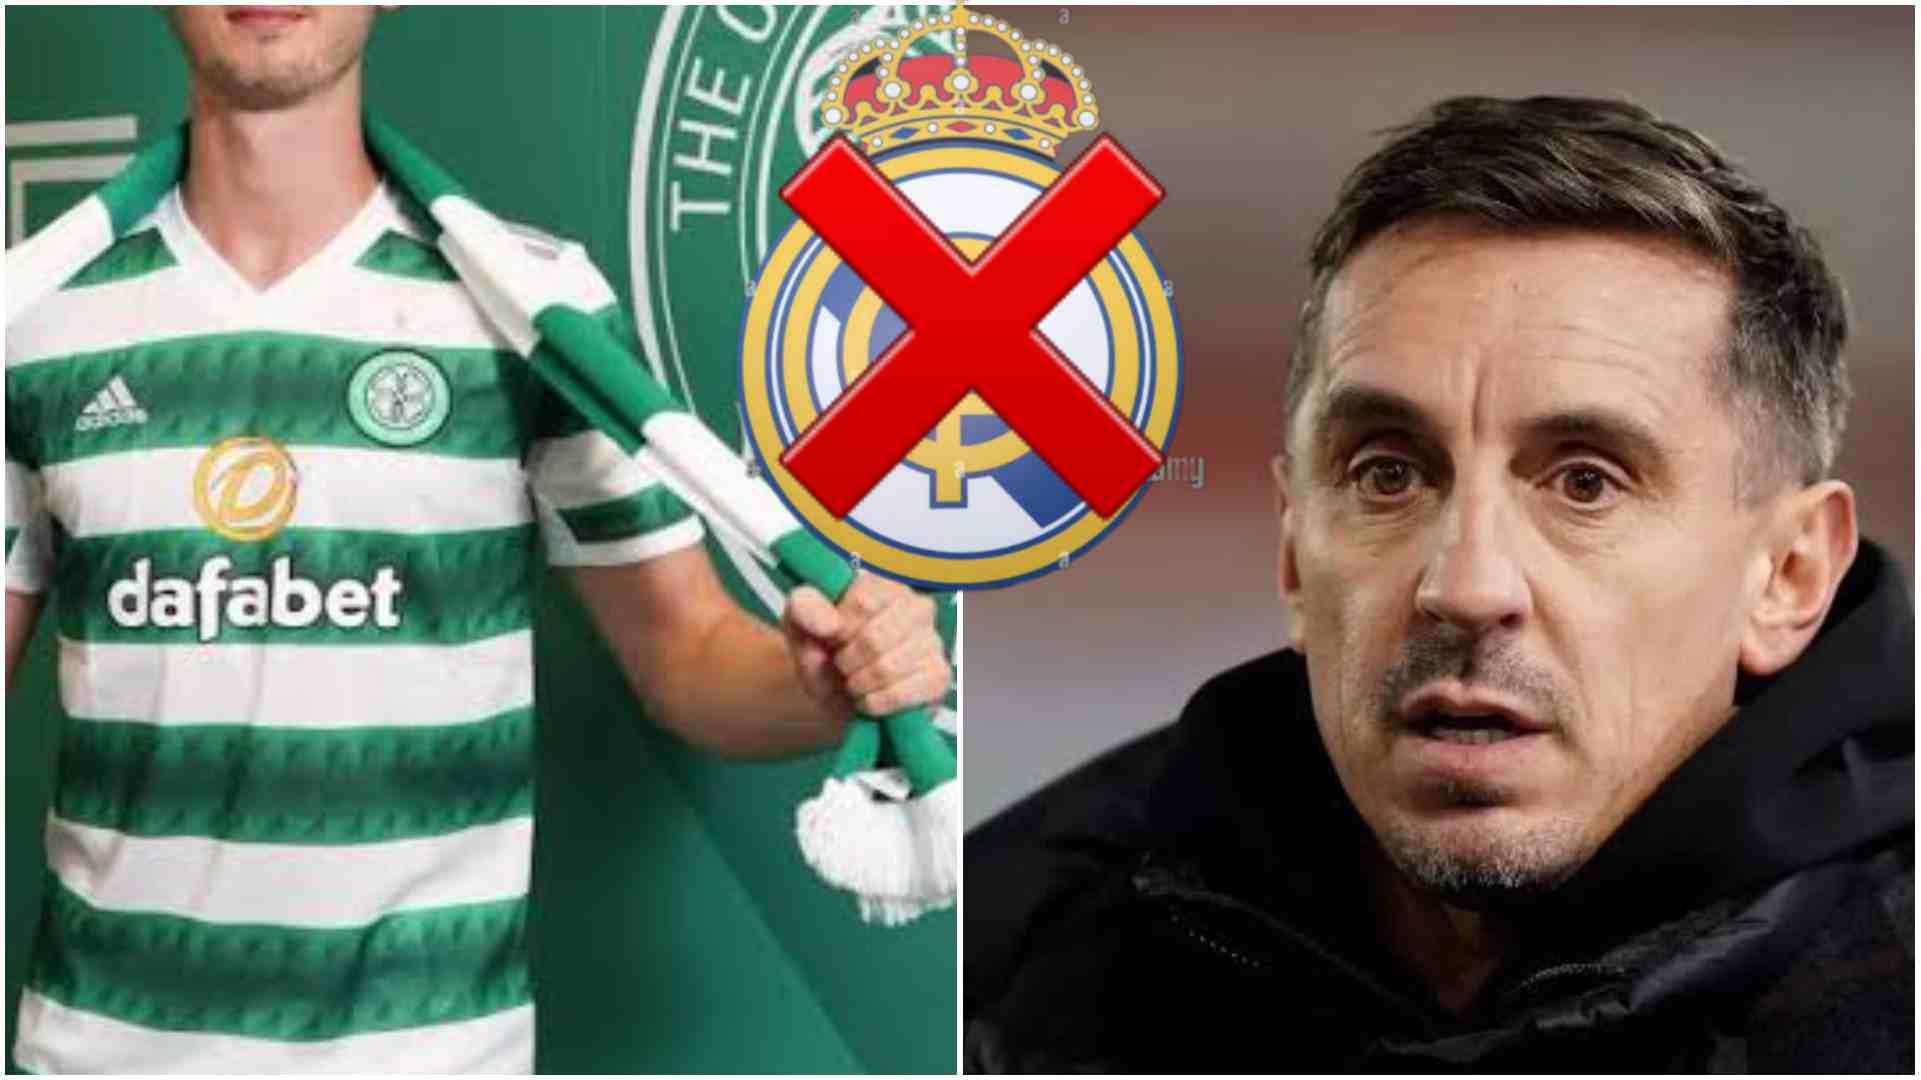 BREAKING – World-class best midfielder in Premier League stuns Gary Neville after rejecting move to European Giants Real Madrid to SIGN for Celtic in Scotland